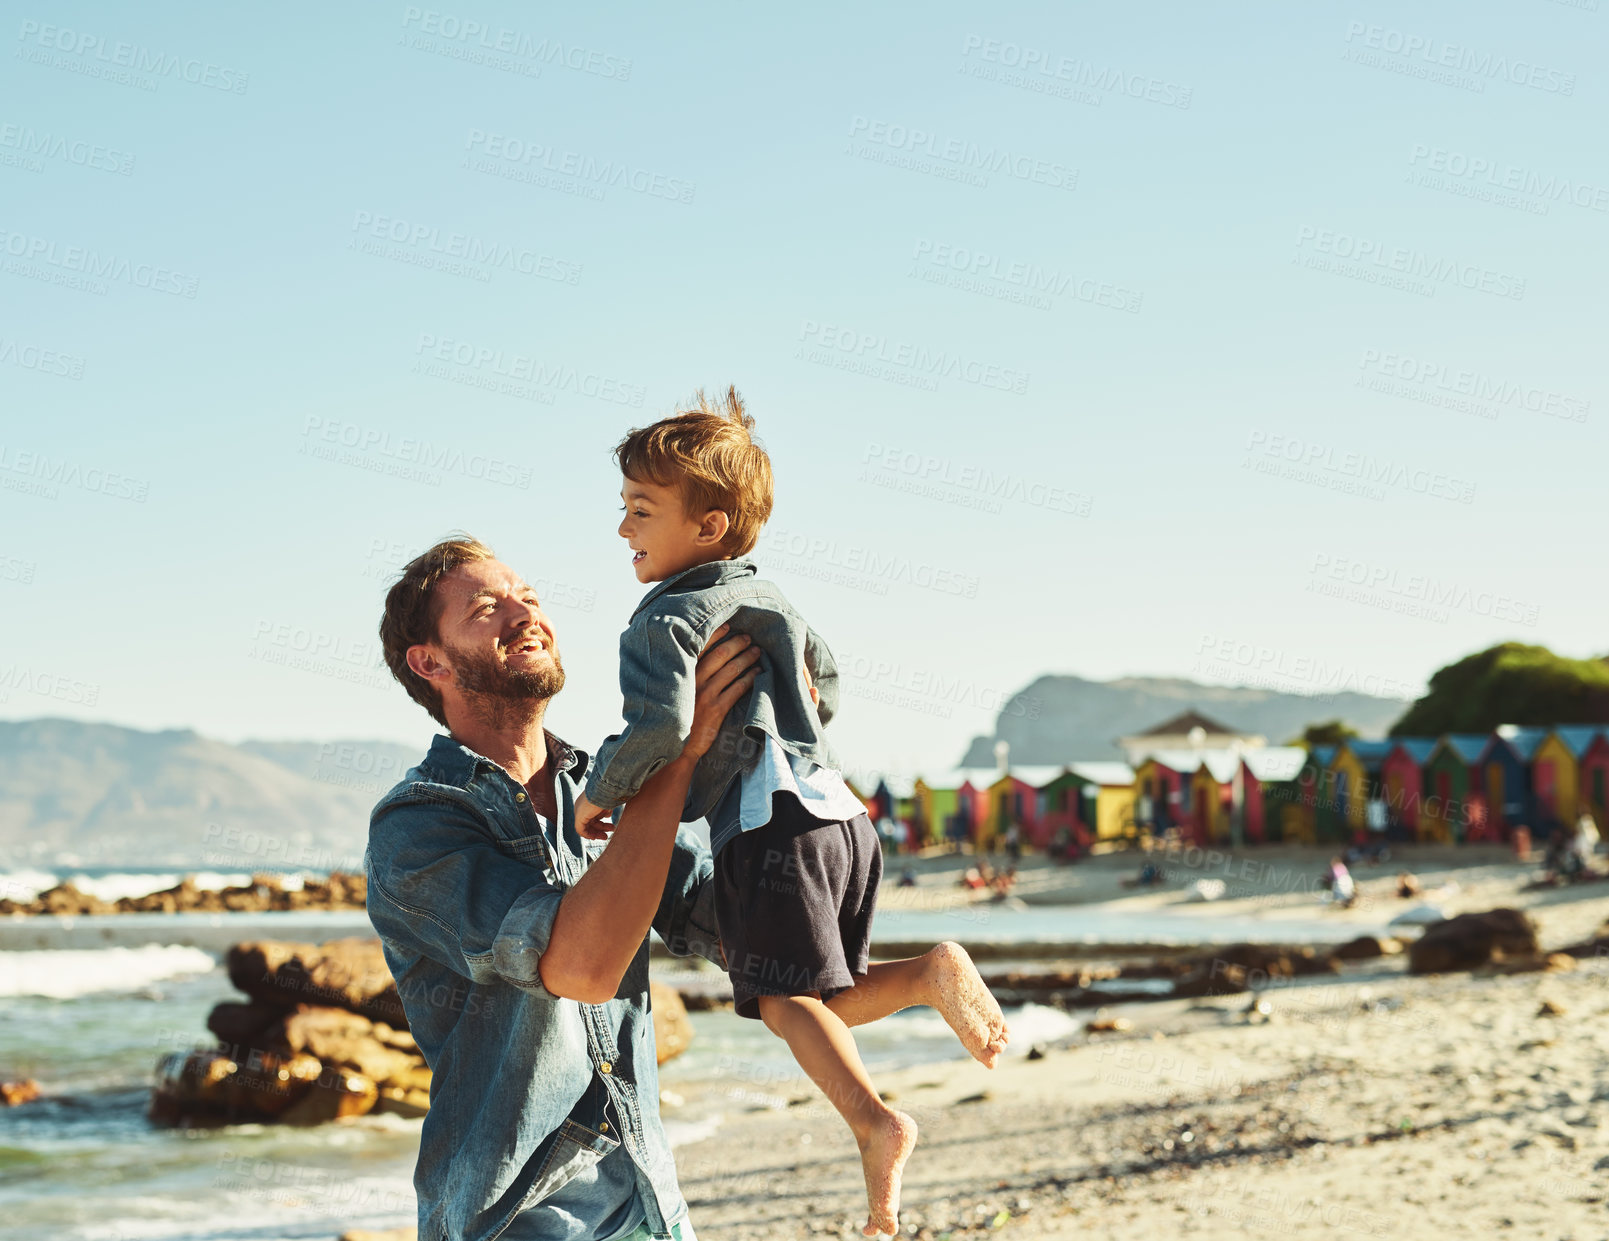 Buy stock photo Shot of a young Father tossing his son into the air at the beach